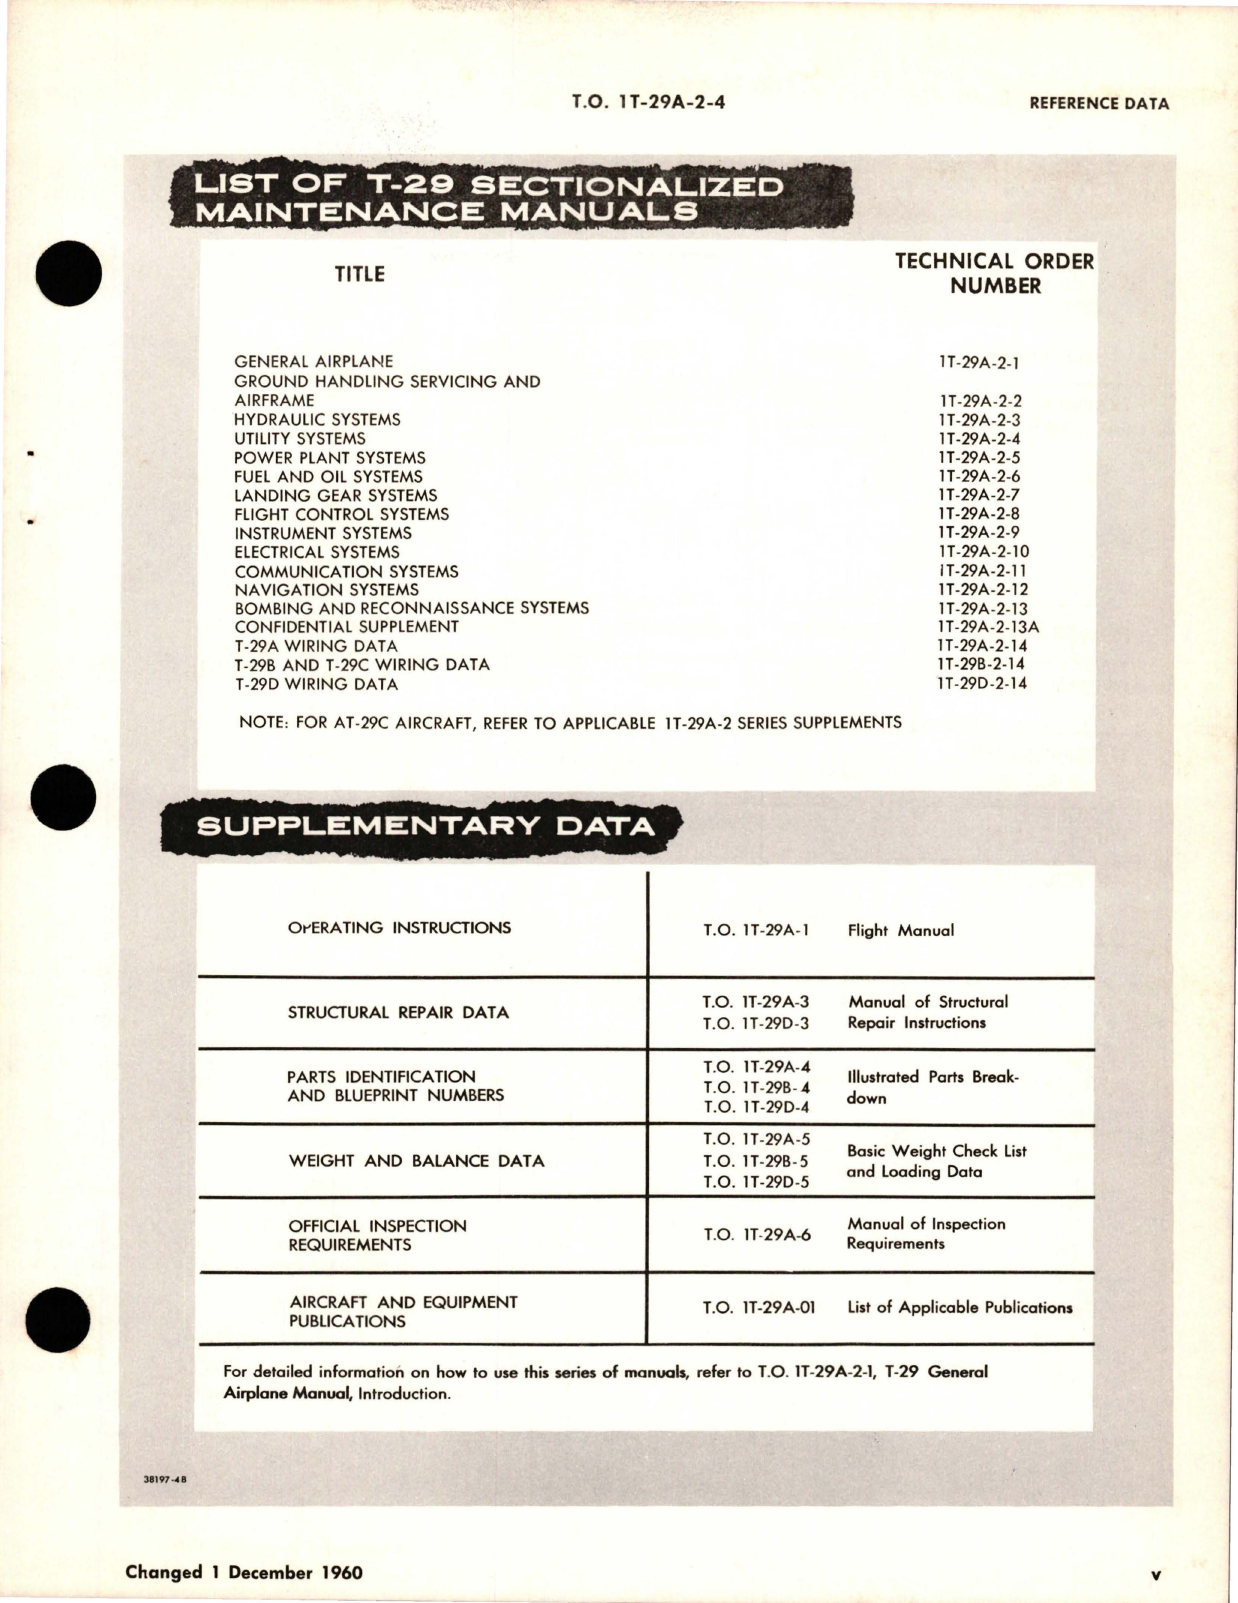 Sample page 7 from AirCorps Library document: Maintenance for Utility Systems for T-29A, T-29B, T-29C and T-29D